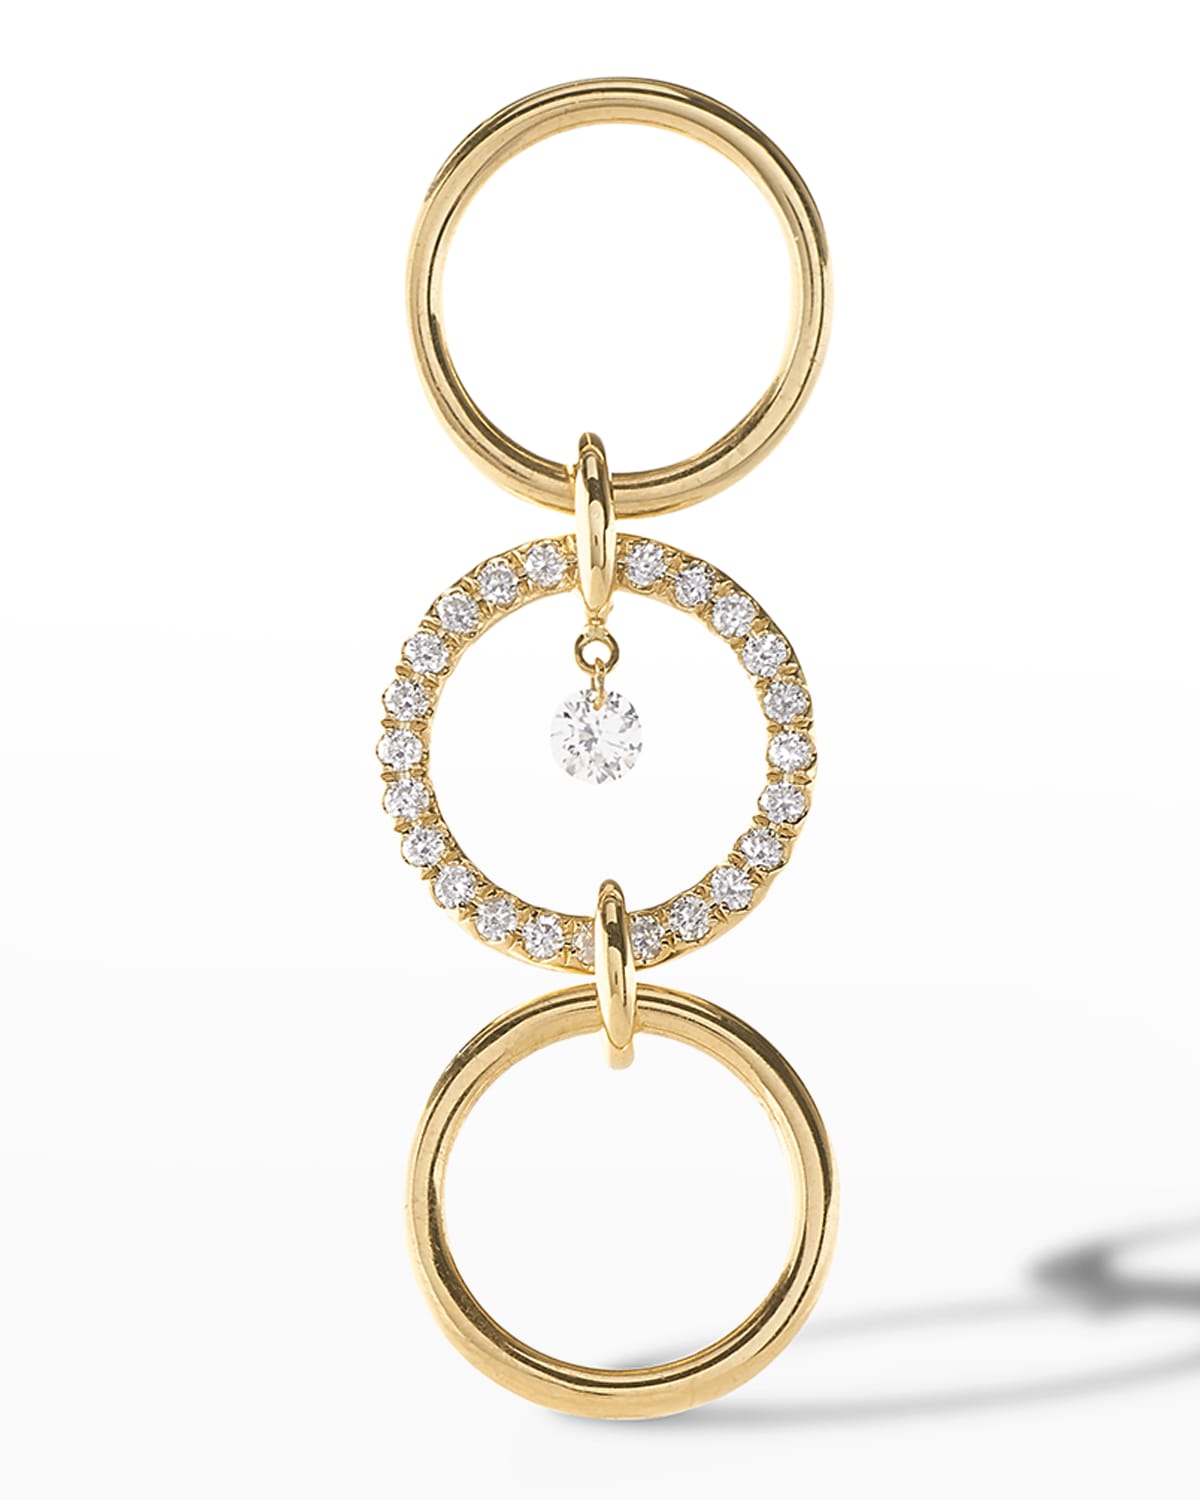 Persée Linear Circle Hanging Earring With Diamond In The Middle, Single